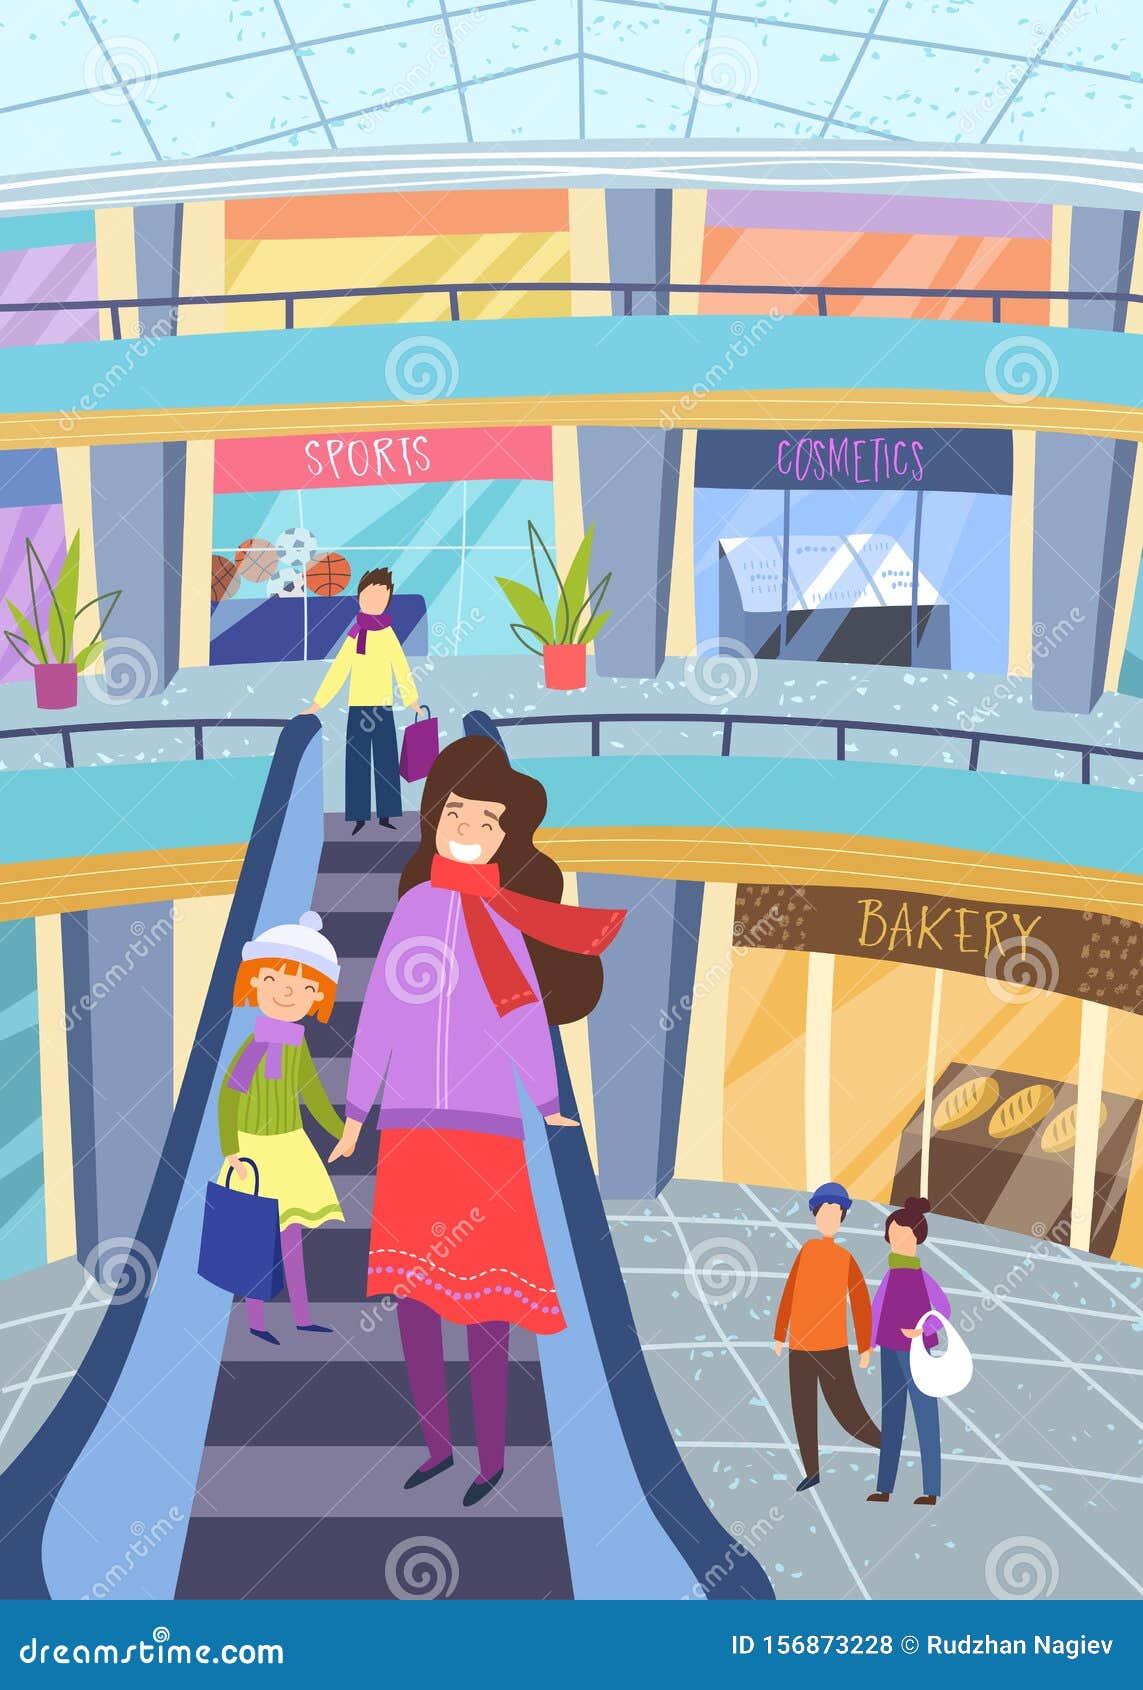 Young Mother Shopping with Her Little Daughter Holding Hands As they  Descend on an Indoor Escalator in a Shopping Mall Stock Vector -  Illustration of colorful, people: 156873228